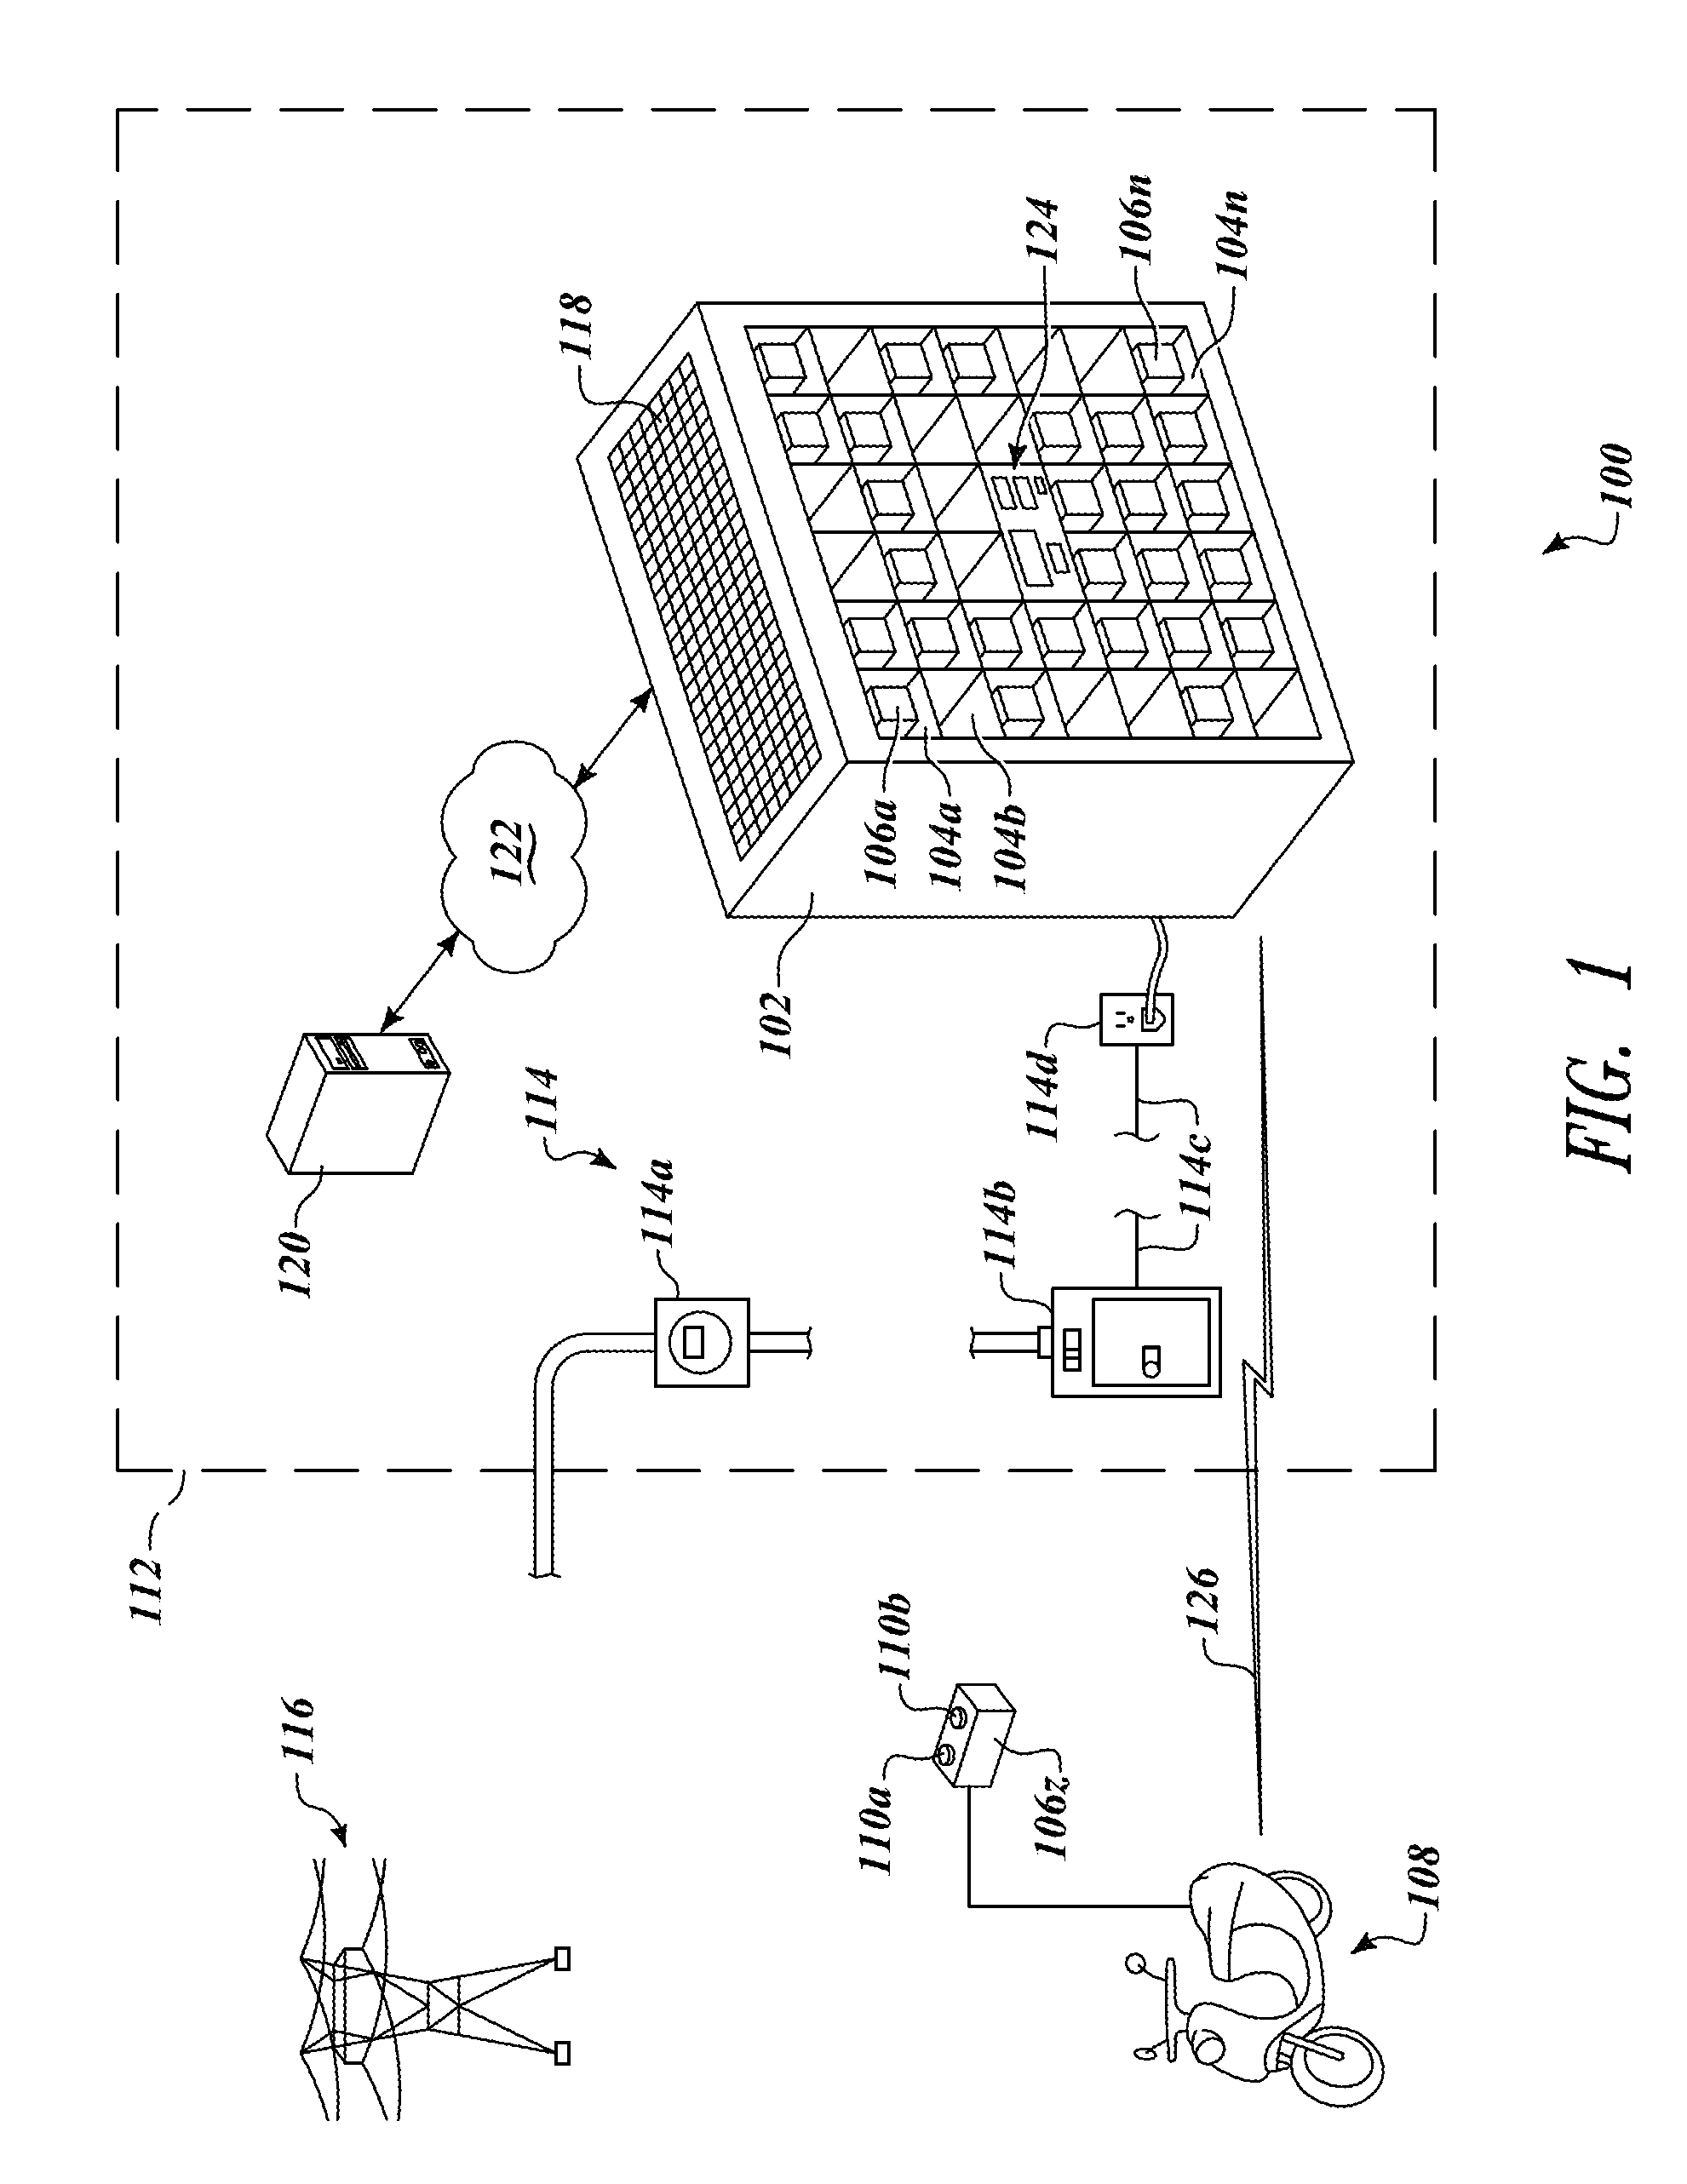 Apparatus, method and article for physical security of power storage devices in vehicles